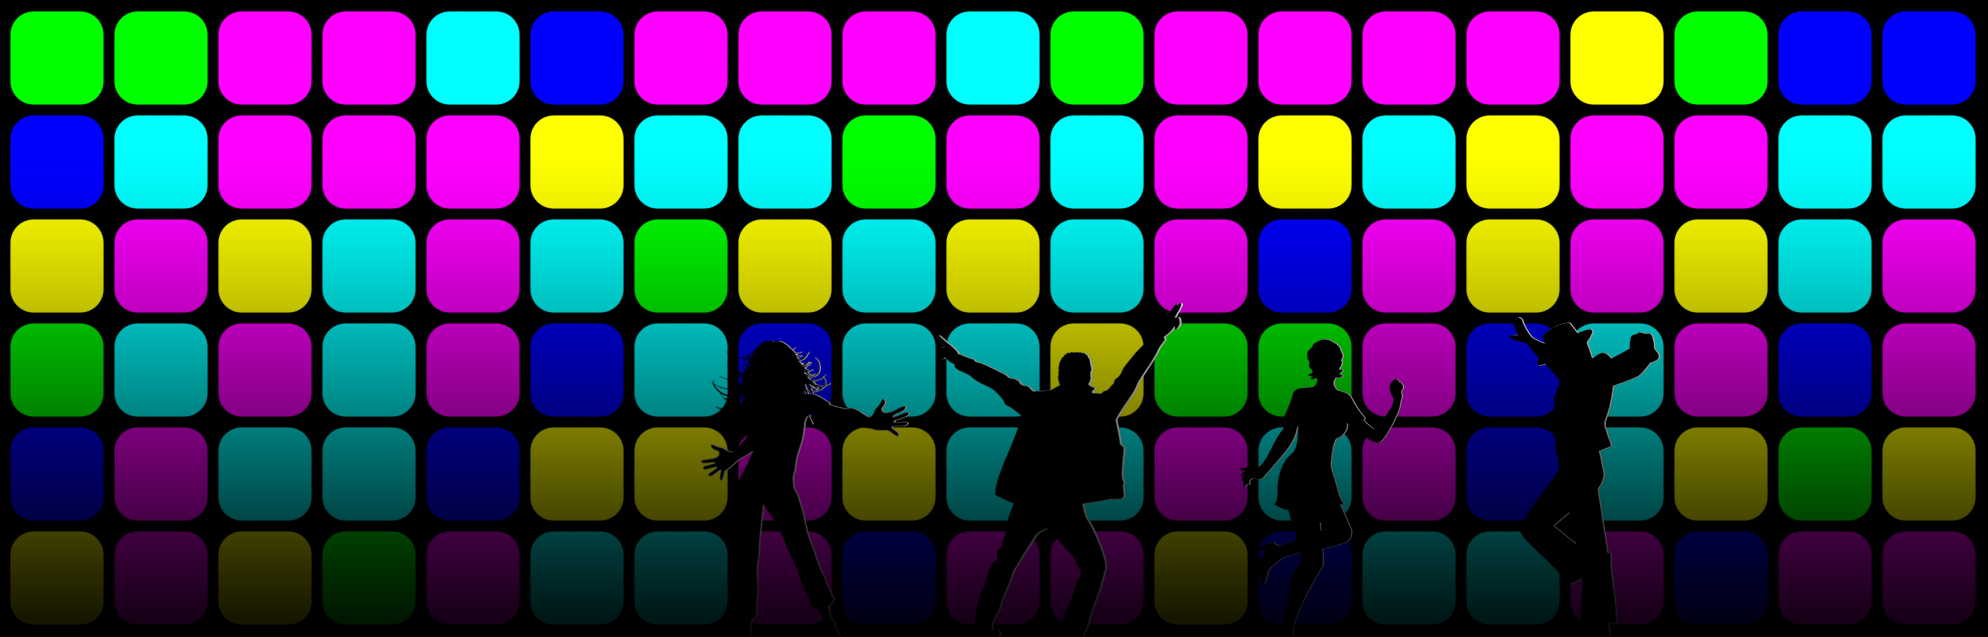 silhouettes of people dancing against a background of colored squares